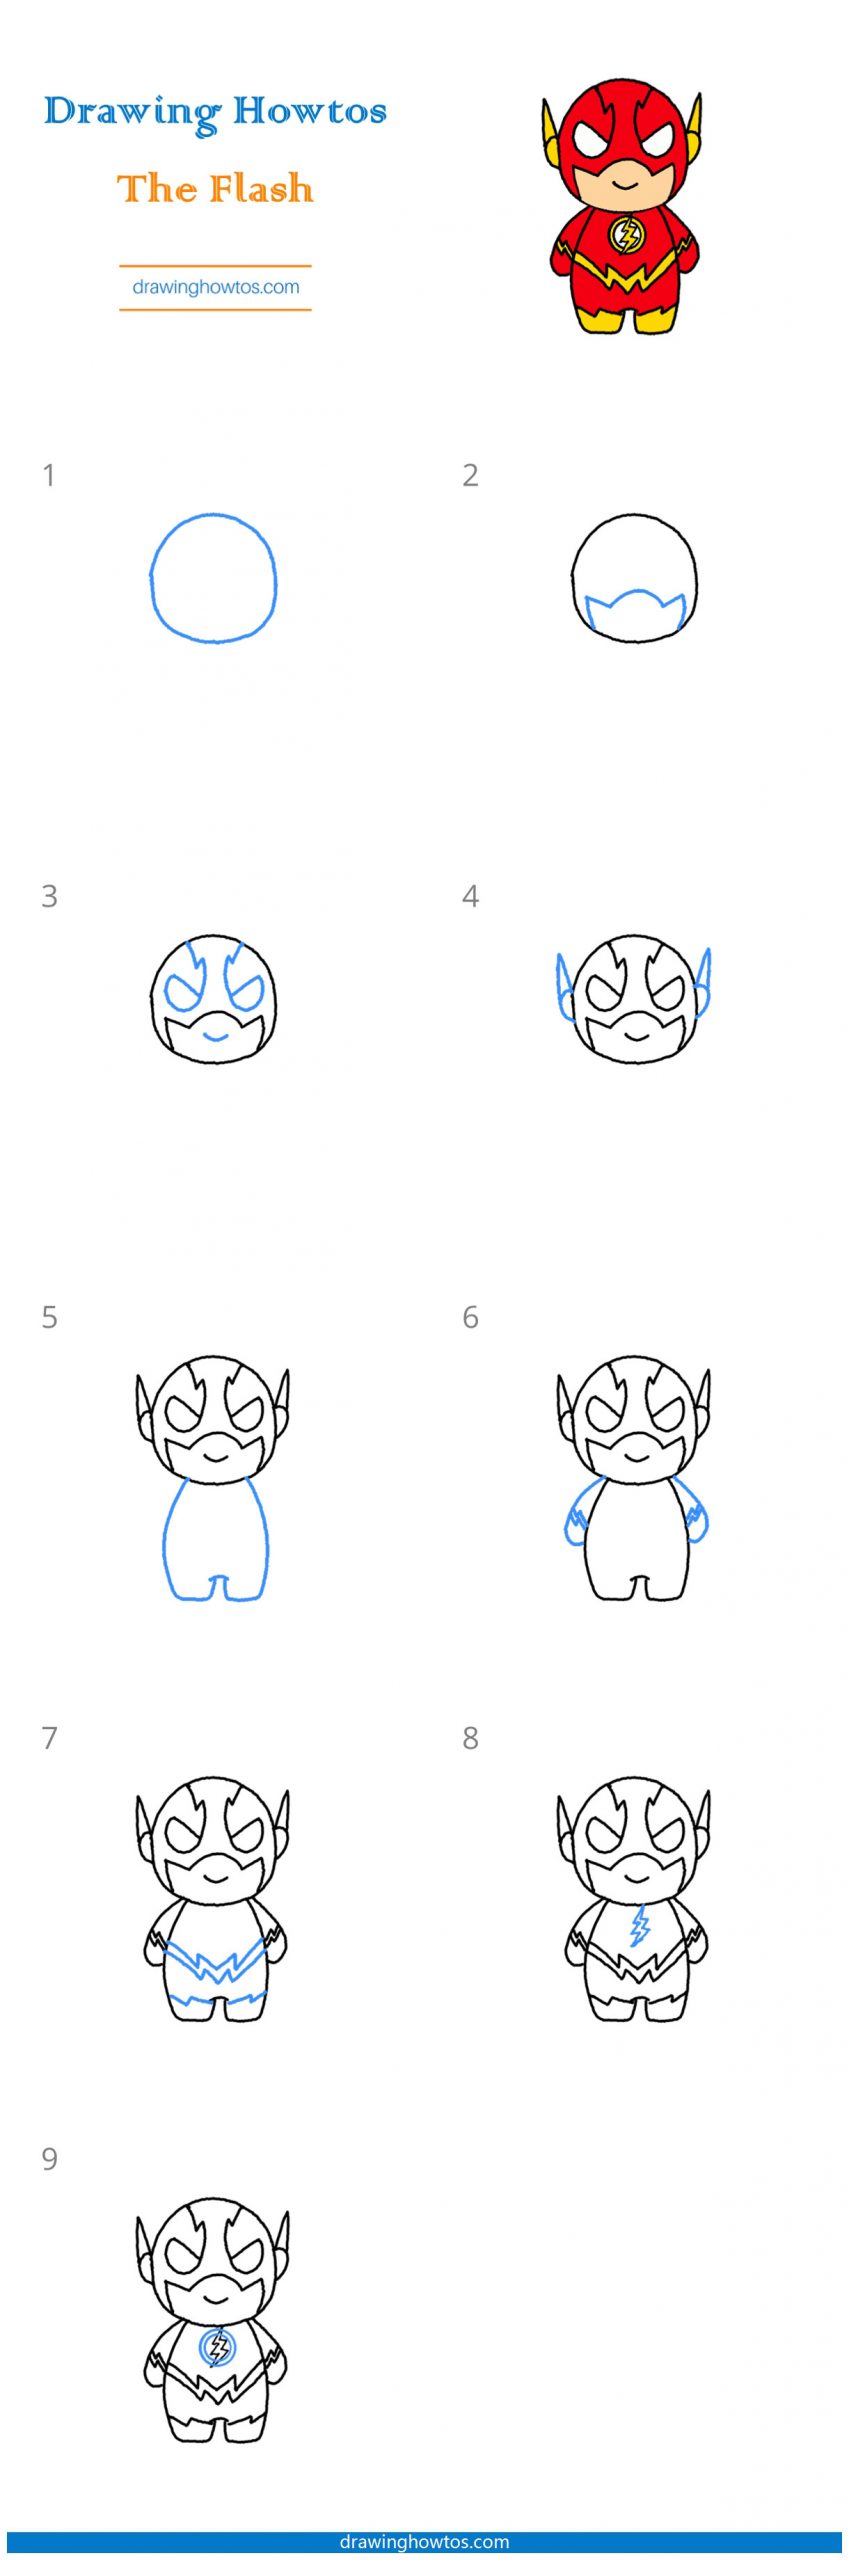 How to Draw The Flash Cute Step by Step